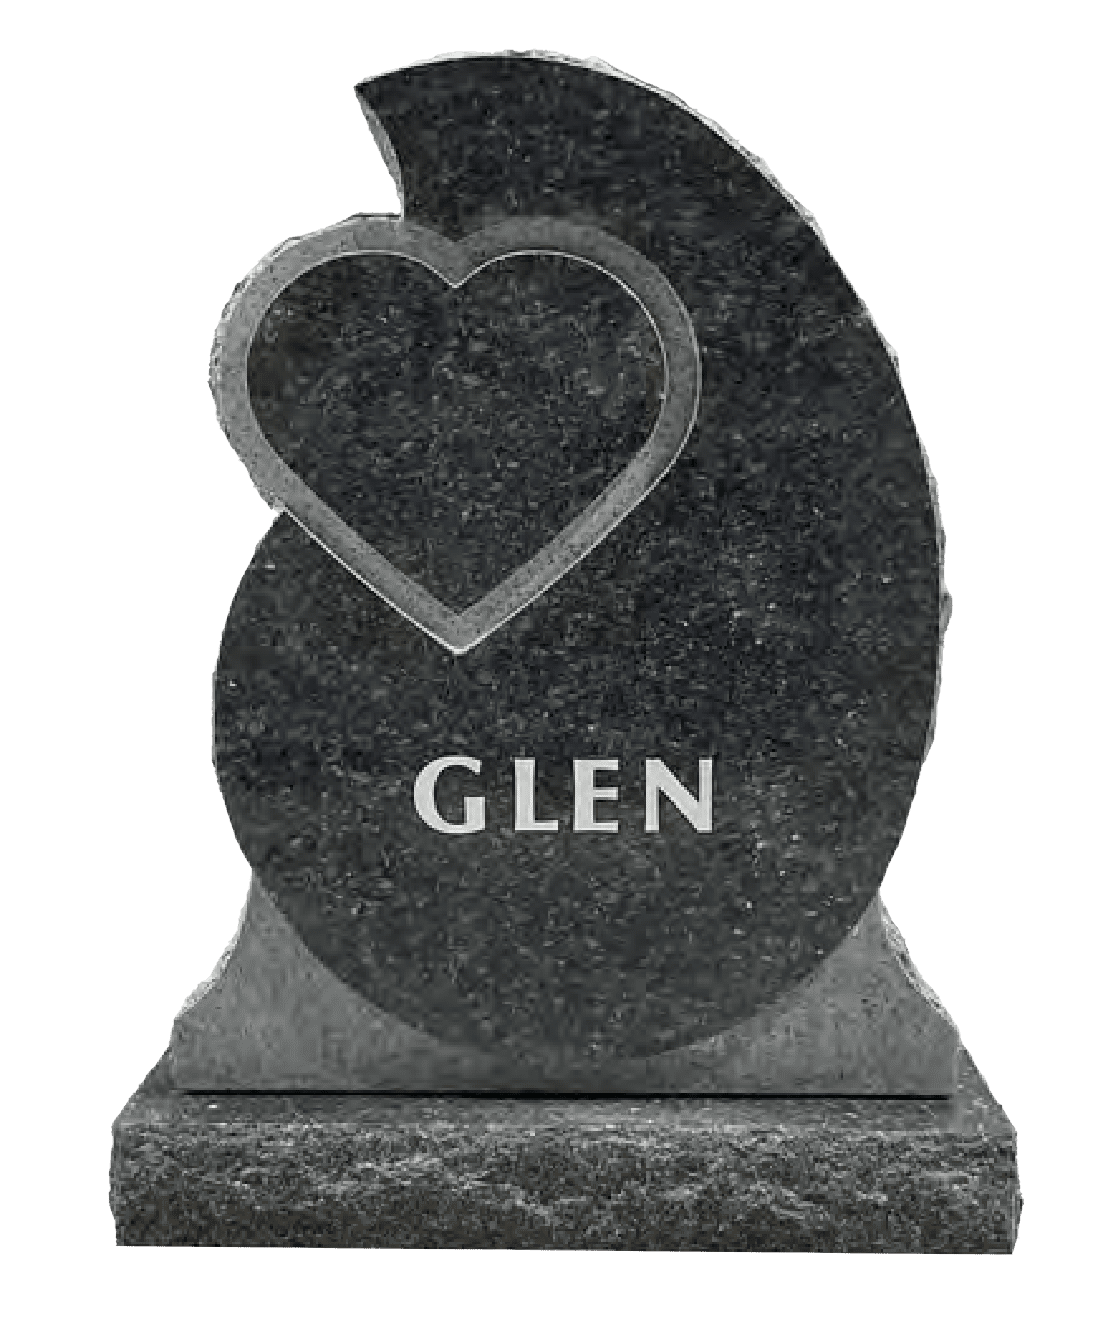 A black stone with the name glen on it.